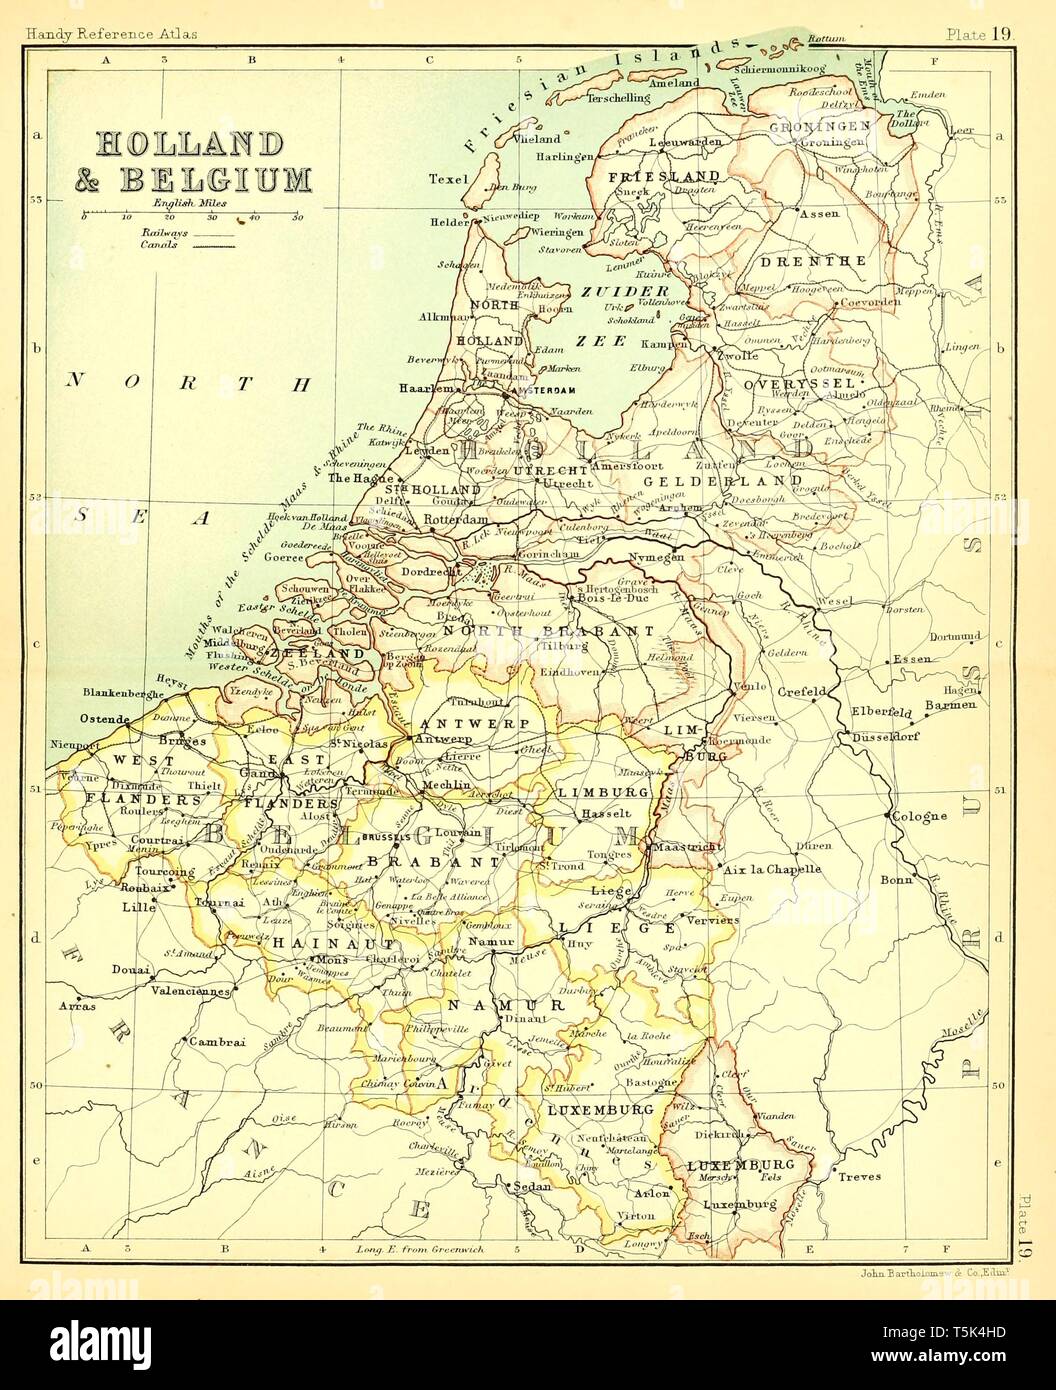 Beautiful vintage hand drawn map illustrations of Holland and Belgium from old book. Can be used as poster or decorative element for interior design. Stock Photo